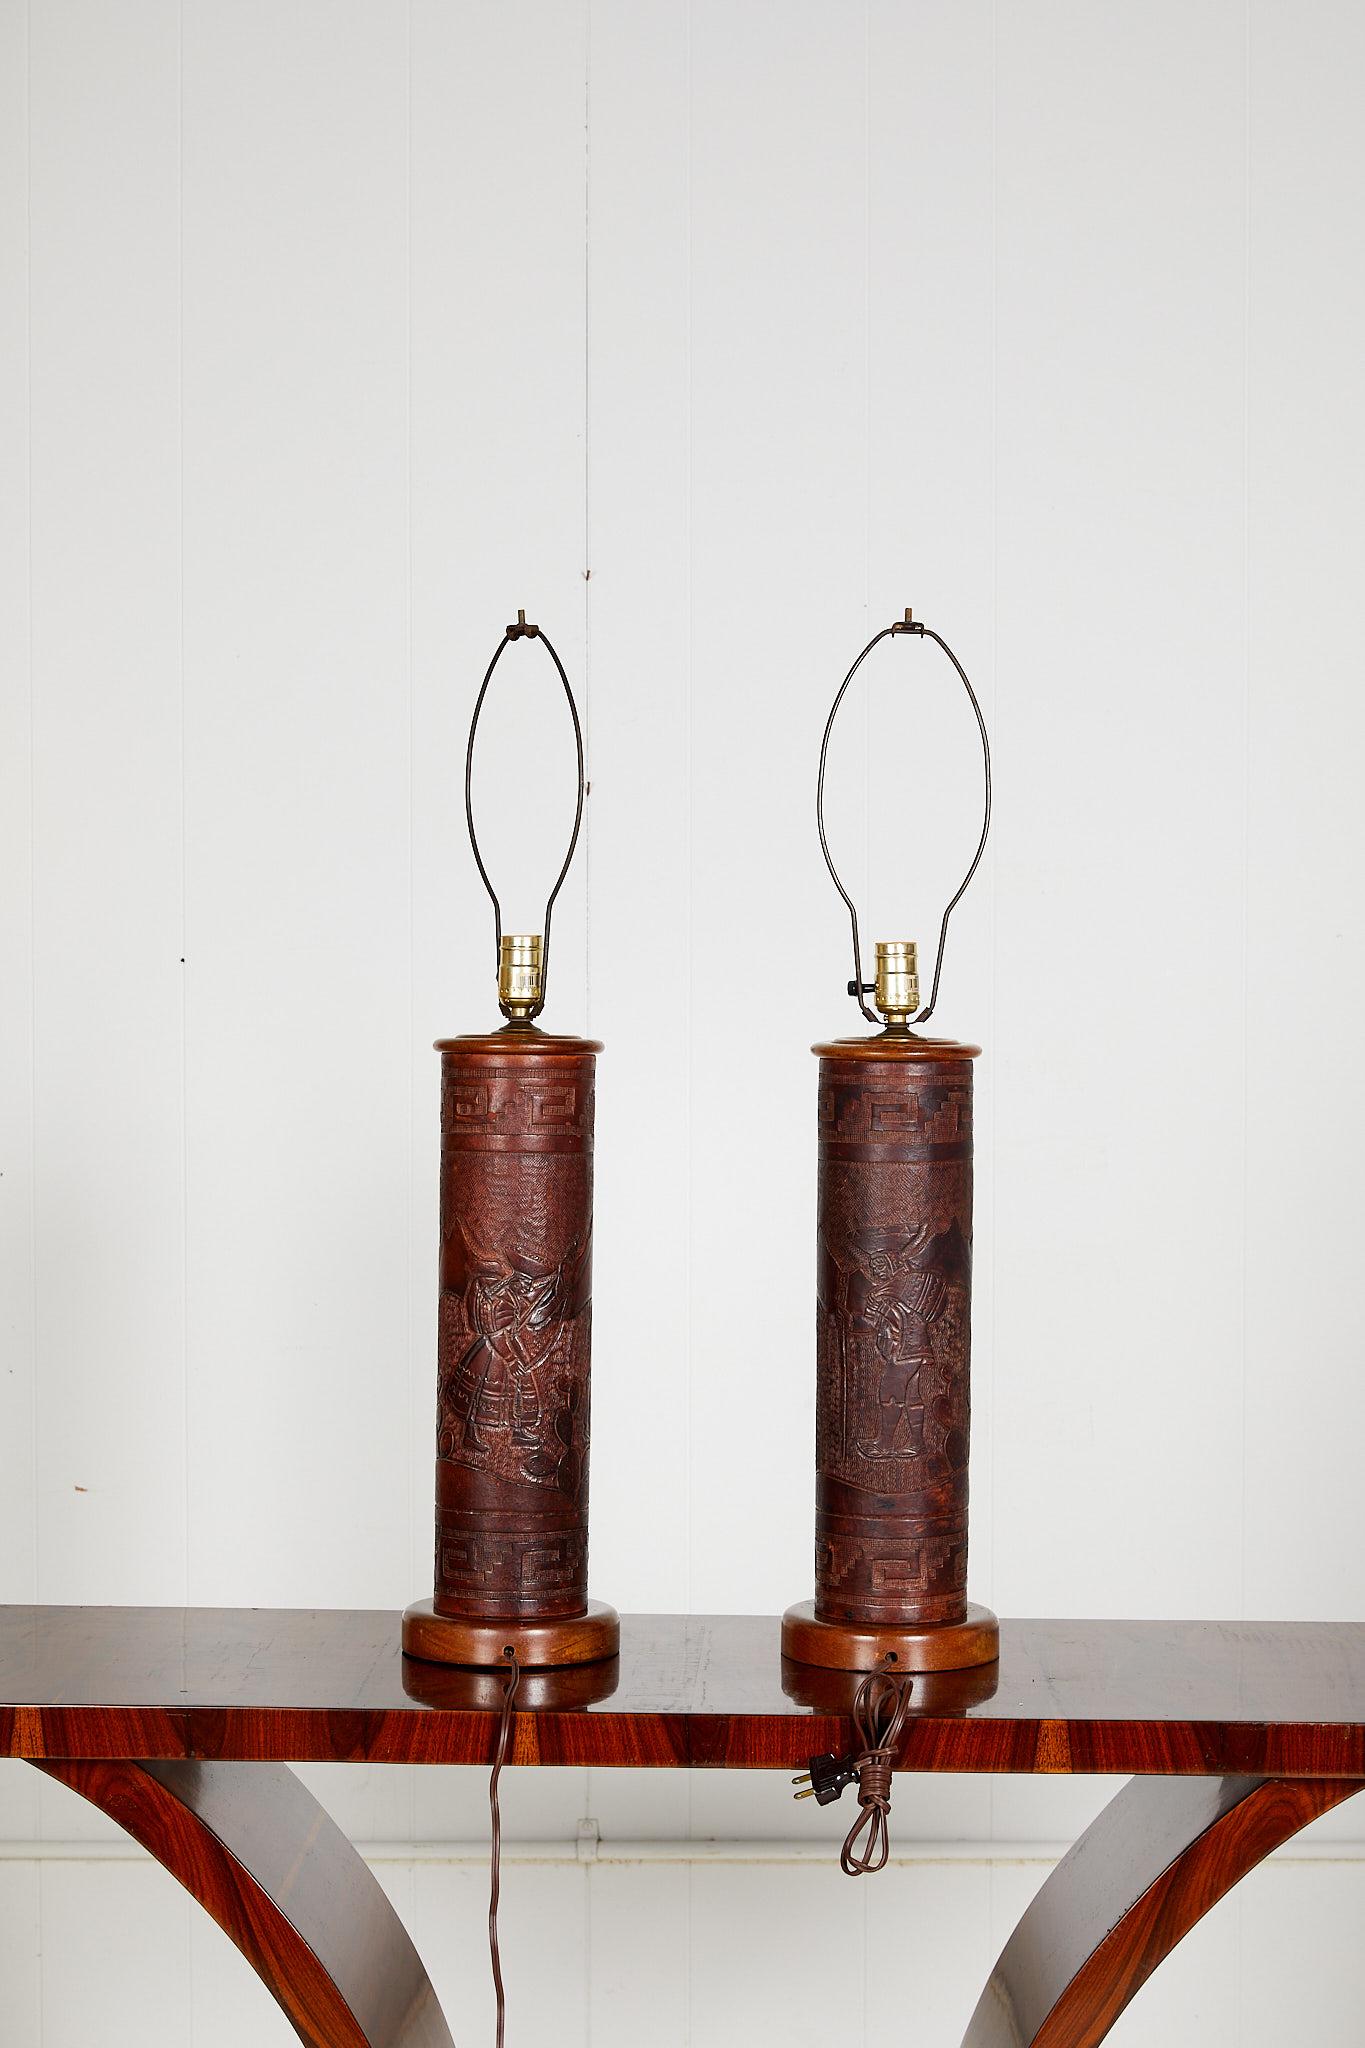 Mid-20th century Peruvian friendly pair of leather cylinder shaped lamps with original hand tooled and embossed leather scenes of landscapes with llamas framed by a Greek key border. The Spanish Colonial style lamps are mounted onto turned wooden